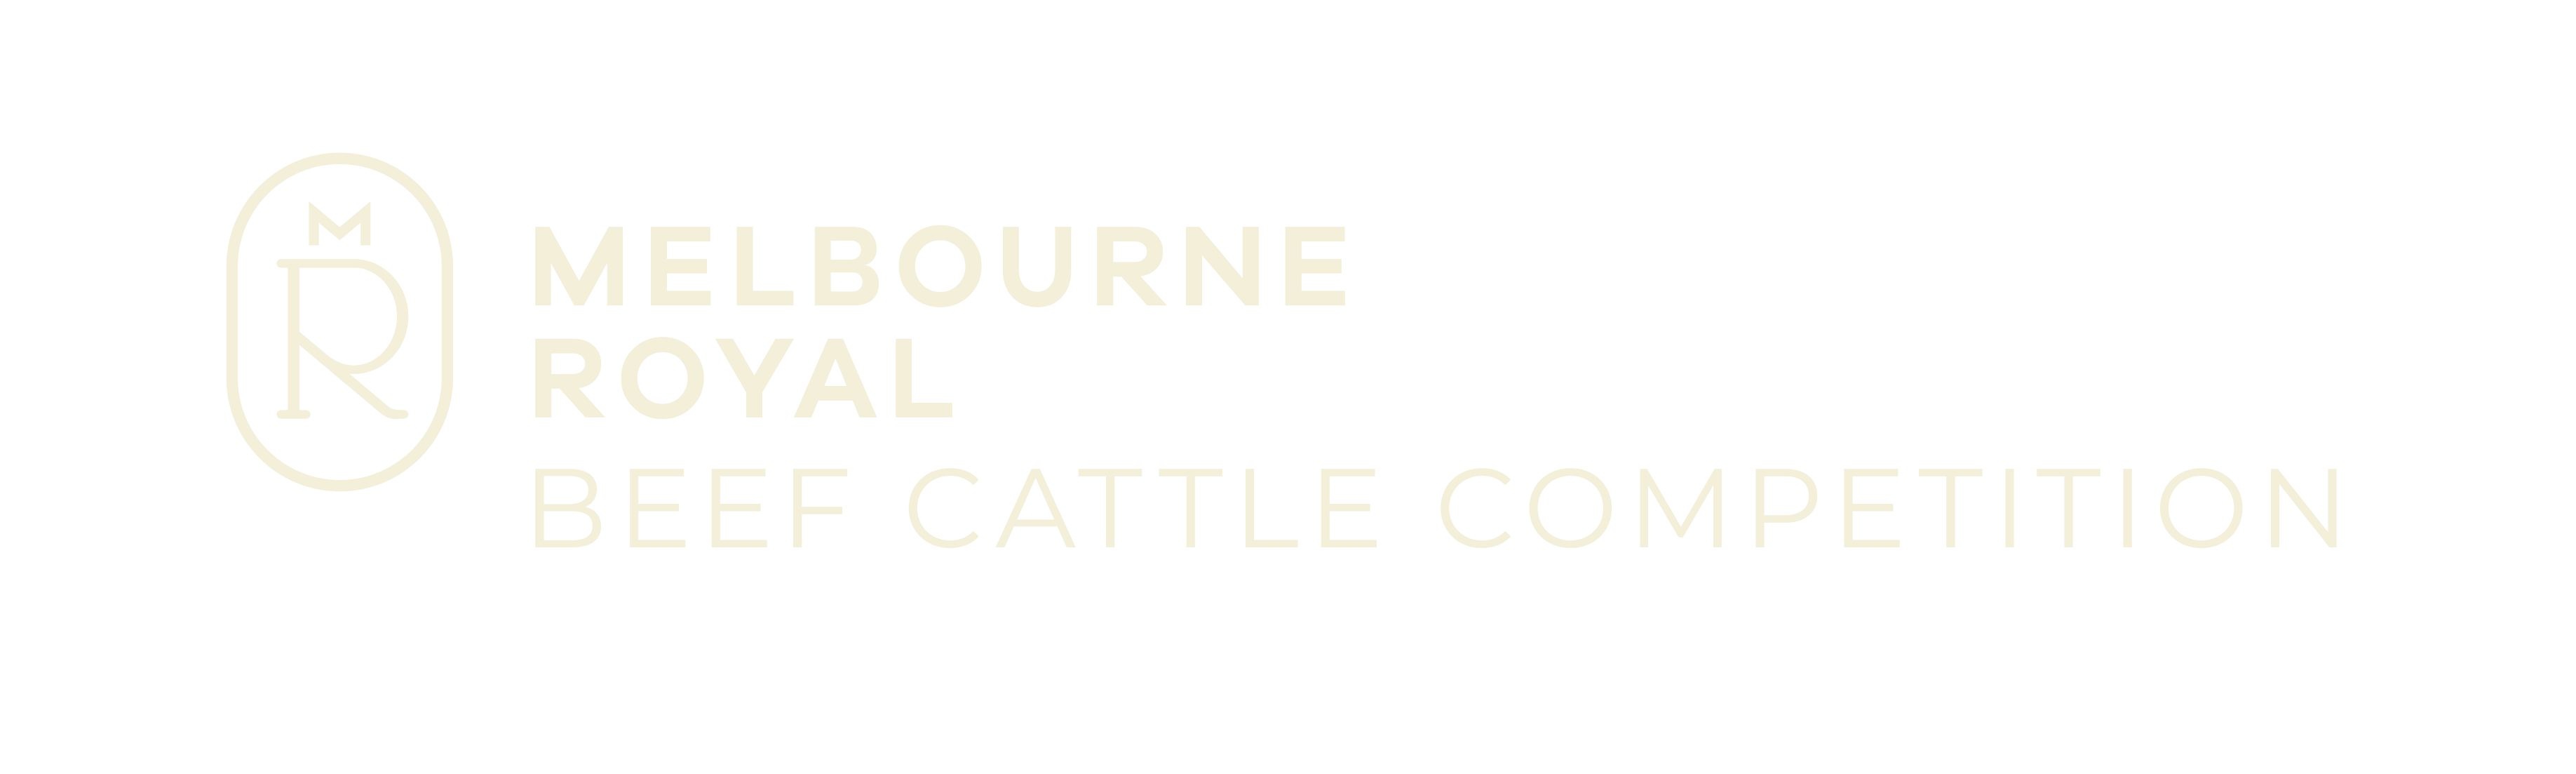  Melbourne Royal Beef Cattle Competition | Home